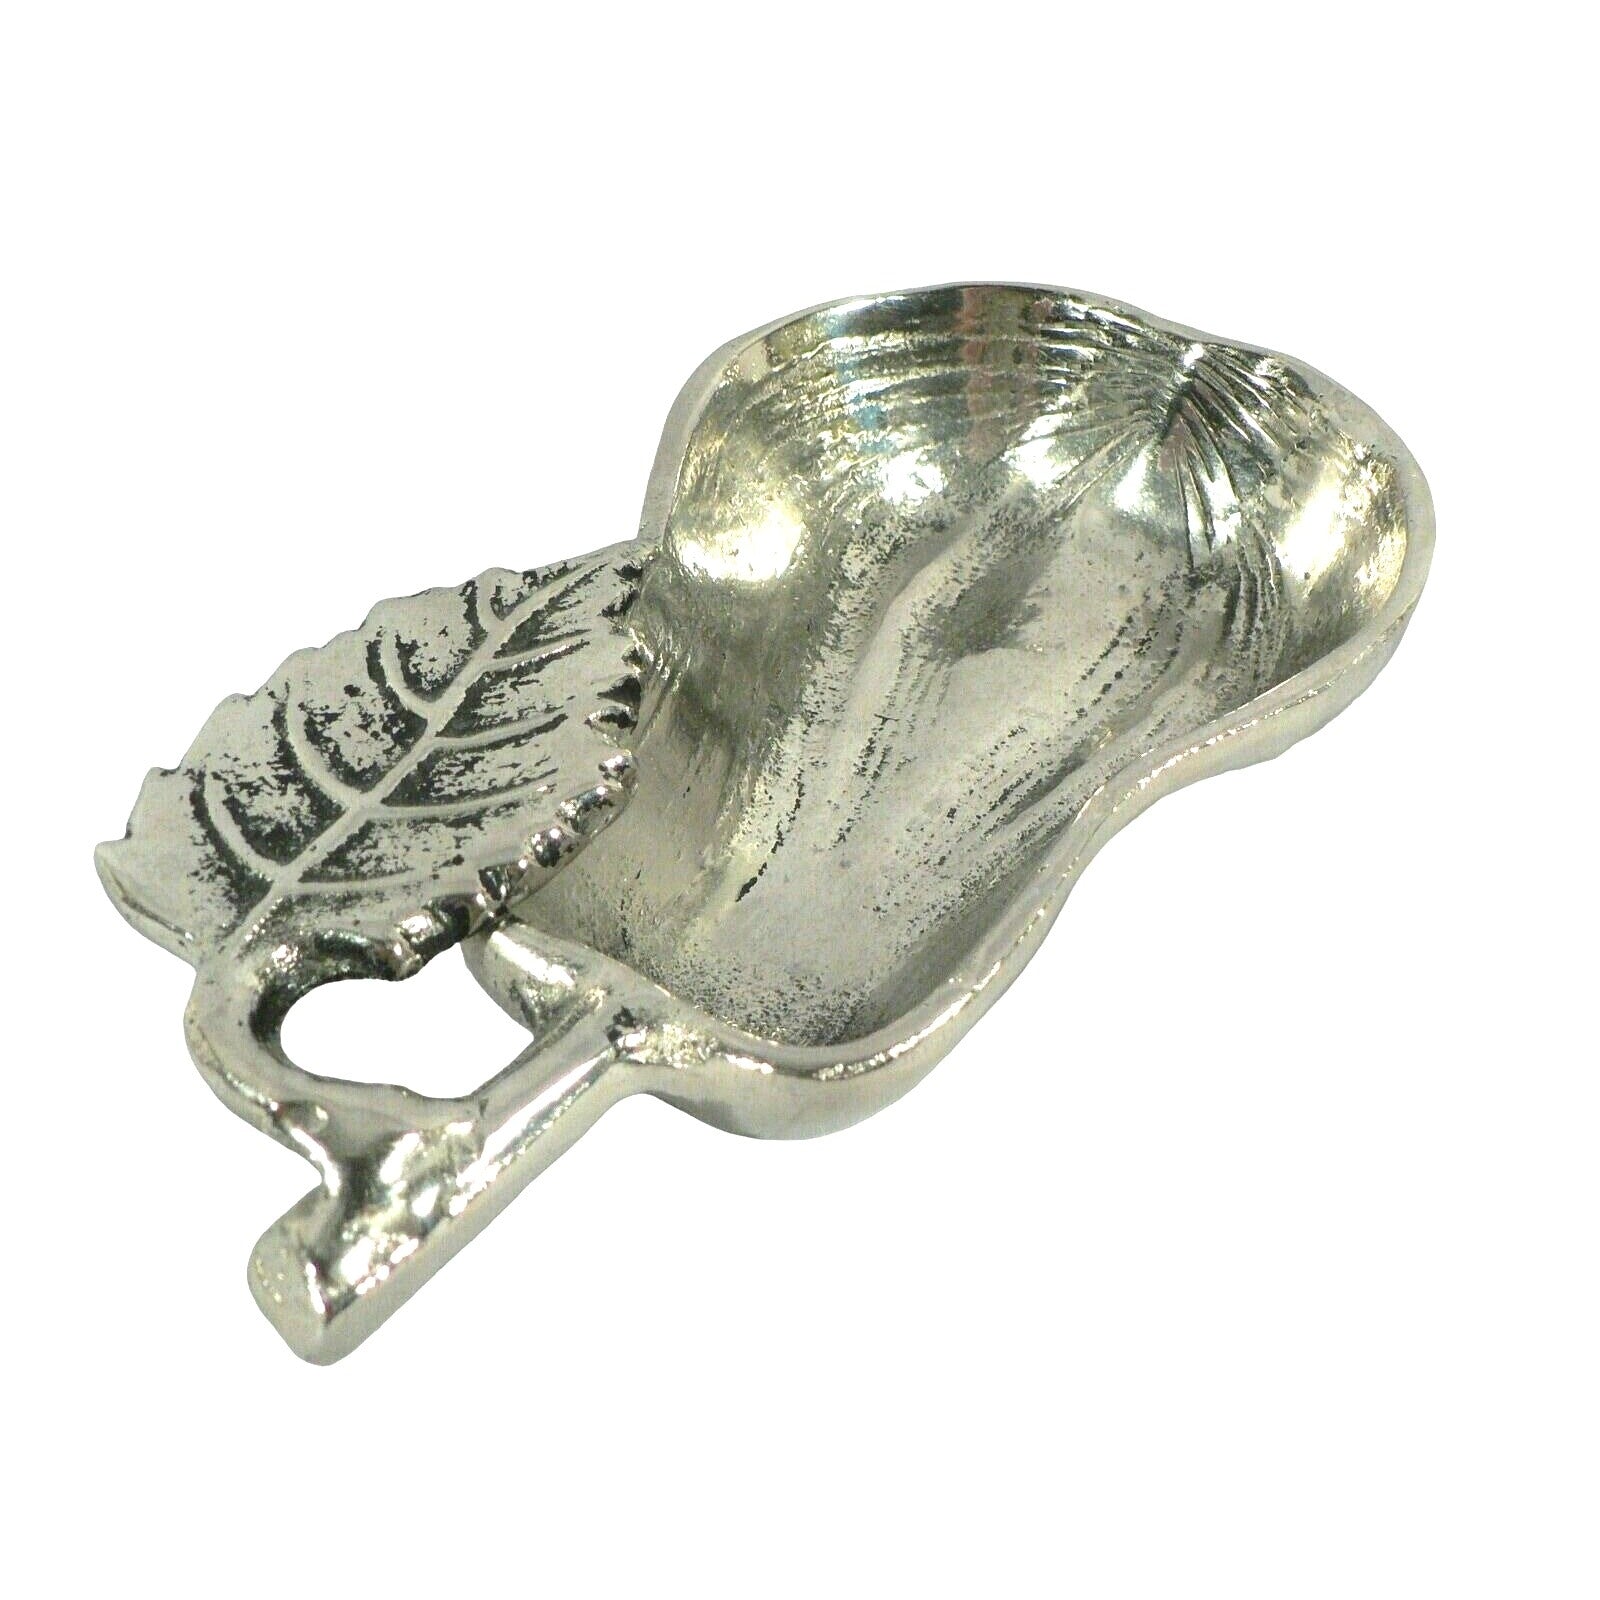 Condiment Nut Candy Dish, Pear Shaped Cast Aluminum Silver Antiqued Finish